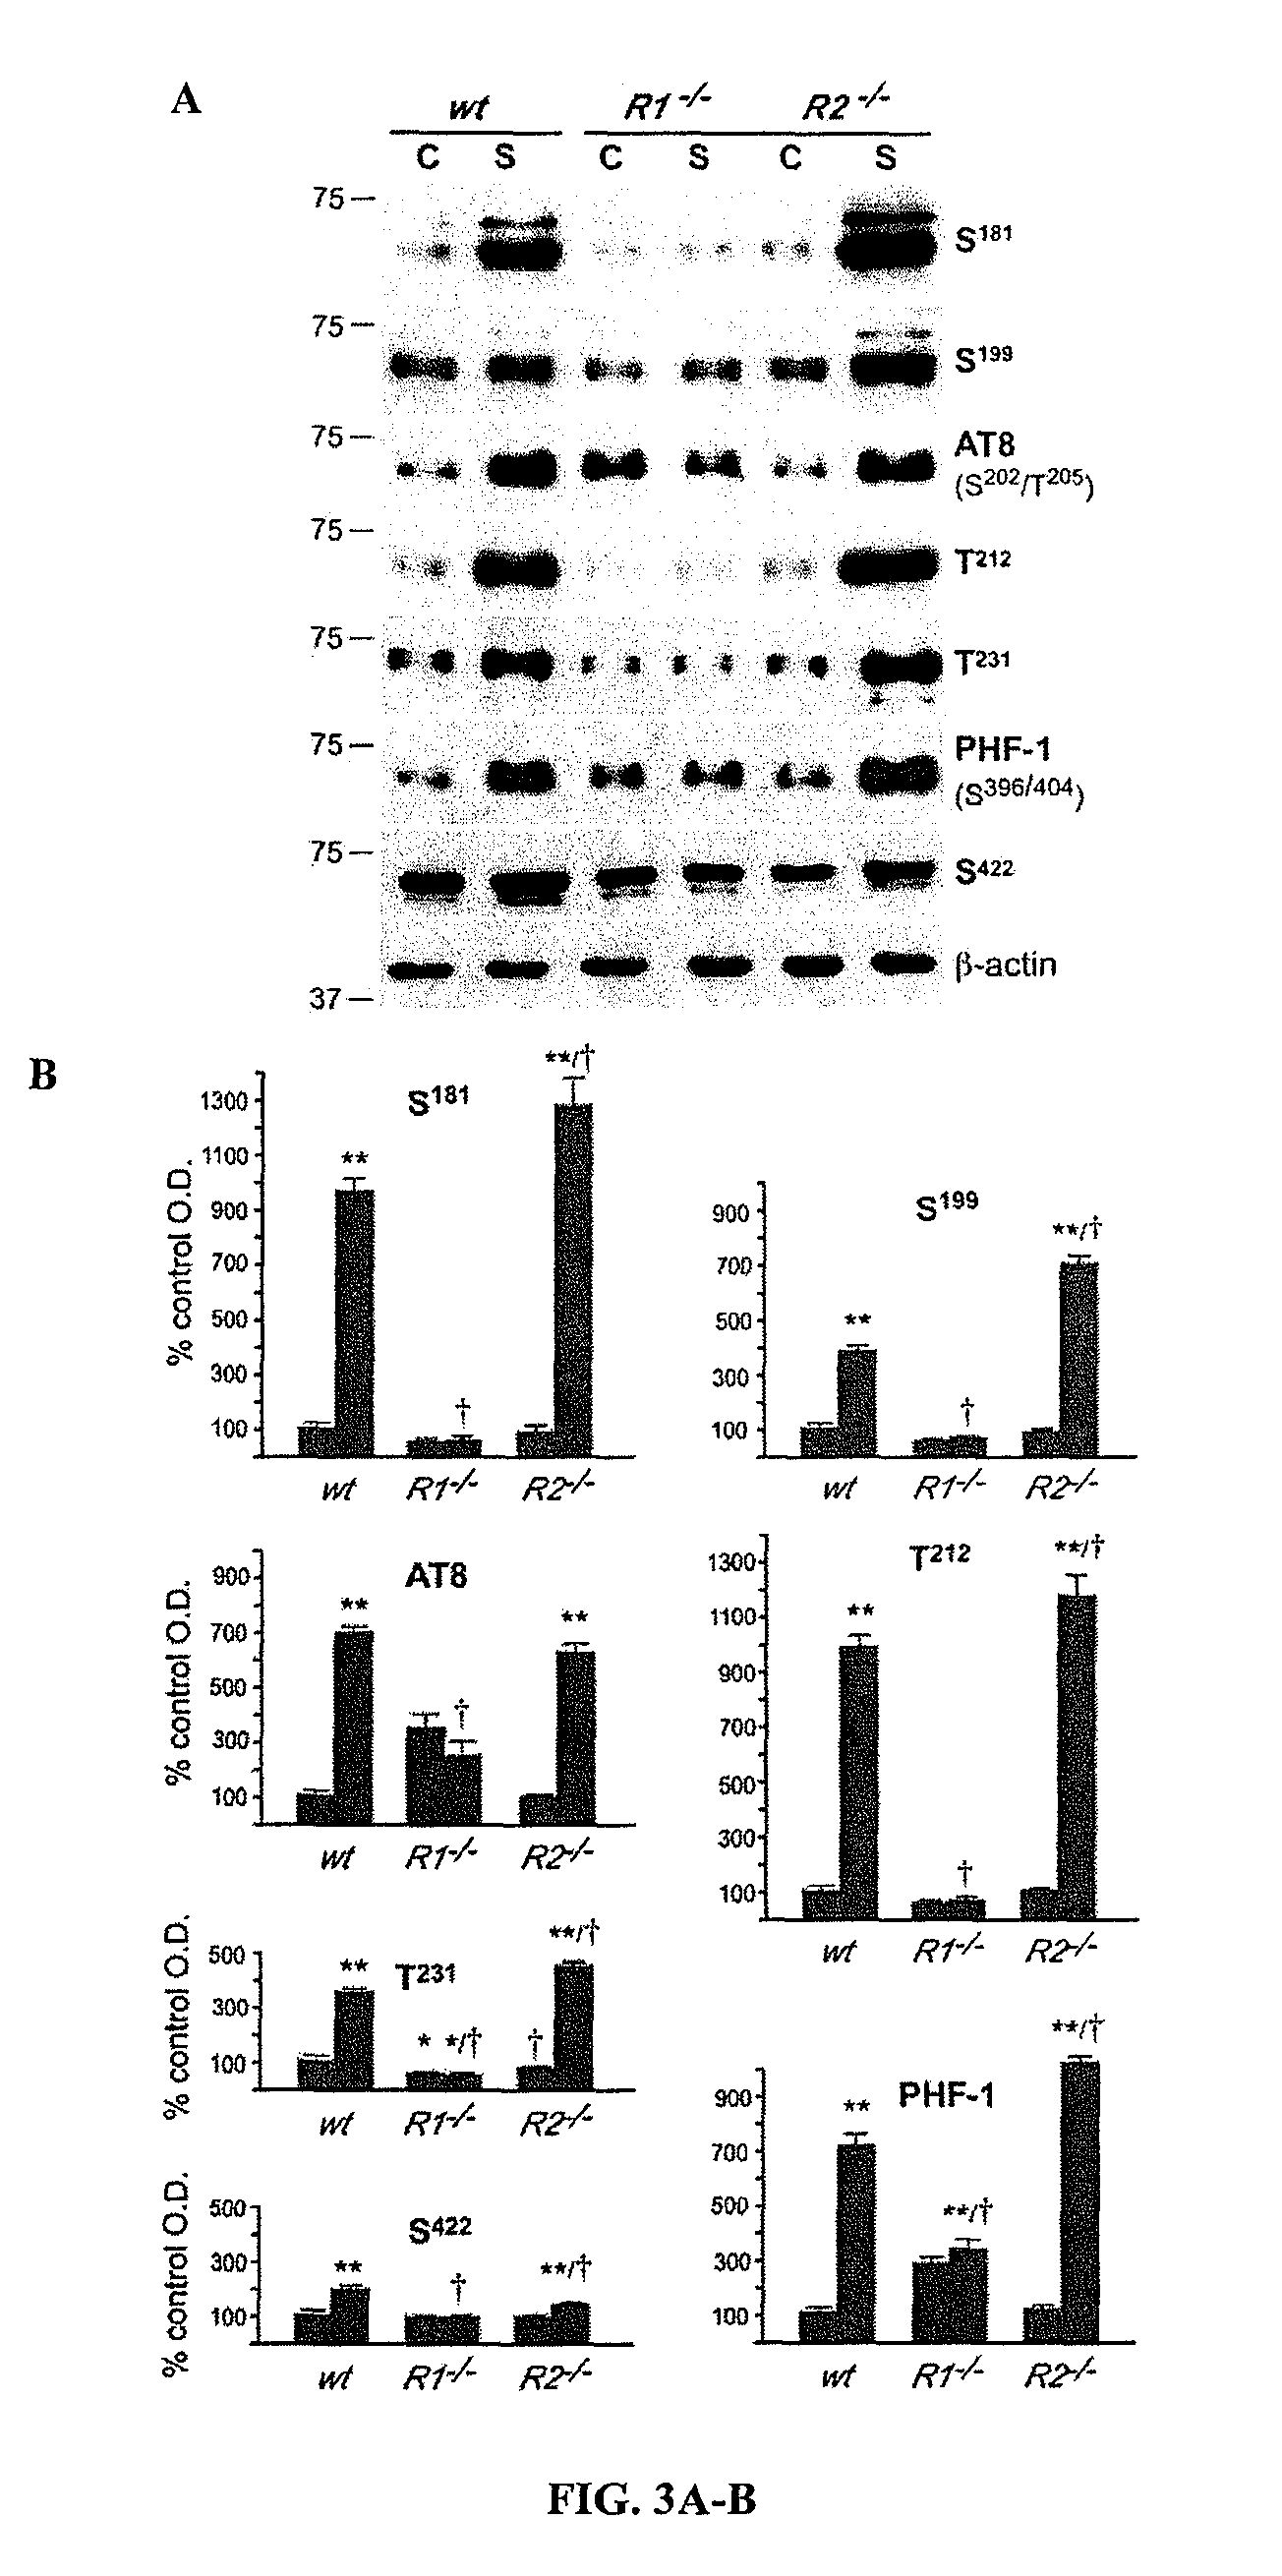 Methods for treatment and prevention of tauopathies and amyloid beta amyloidosis by modulating CRF receptor signaling